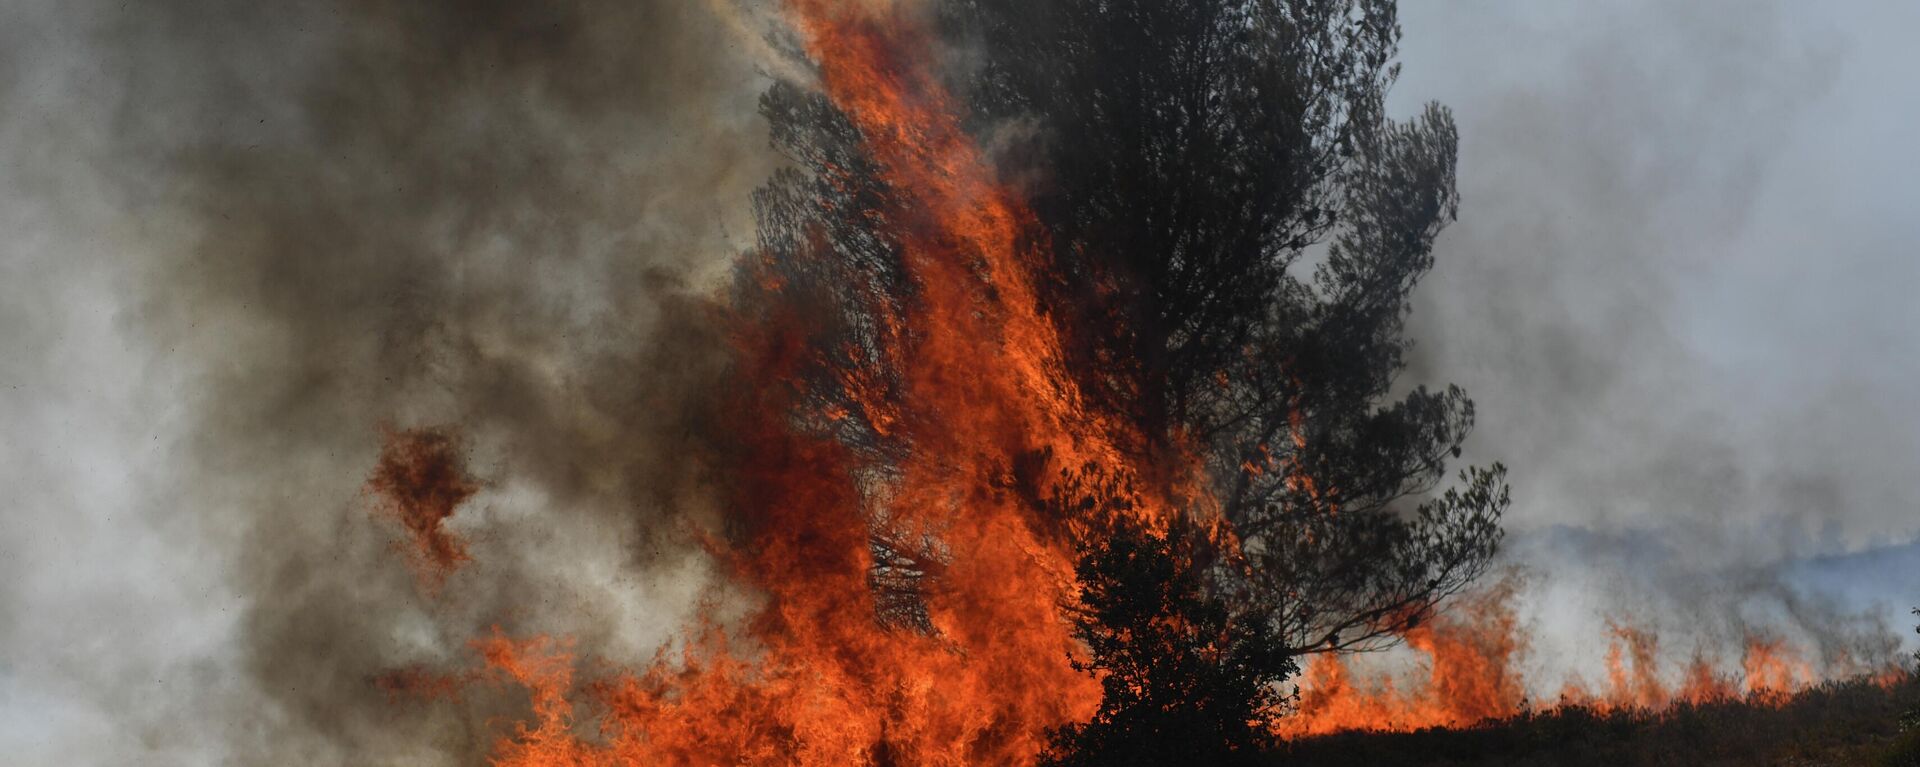 A picture shows a tree burned by a wildfire in Tarascon, southeastern France, on July 15, 2022. - An investigation was opened on July 15 on a fire, now contained, which covered 1,000 hectares and burnt through at least 300 hectares of the Montagnette forest massif south of Avignon. The fire was triggered on July 14 by sparks generated on a railroad track by a passing freight train, the prefecture said. (Photo by CLEMENT MAHOUDEAU / AFP) - Sputnik International, 1920, 15.08.2022